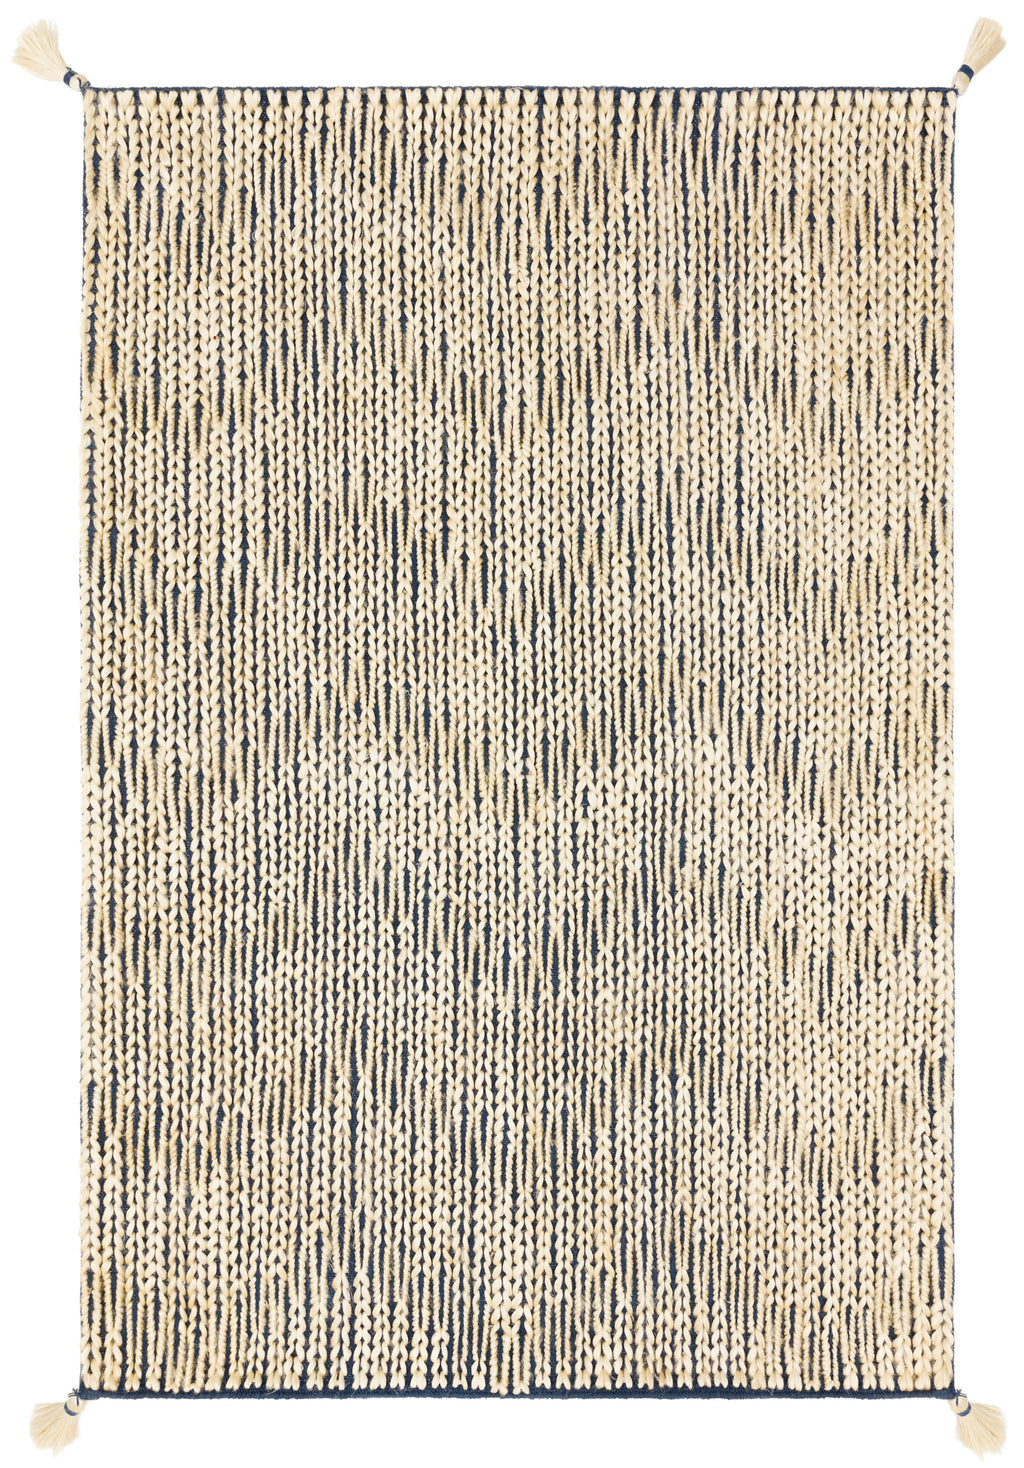 PLAYA Collection Rug  in  NAVY / IVORY Blue Accent Hand-Woven Viscose